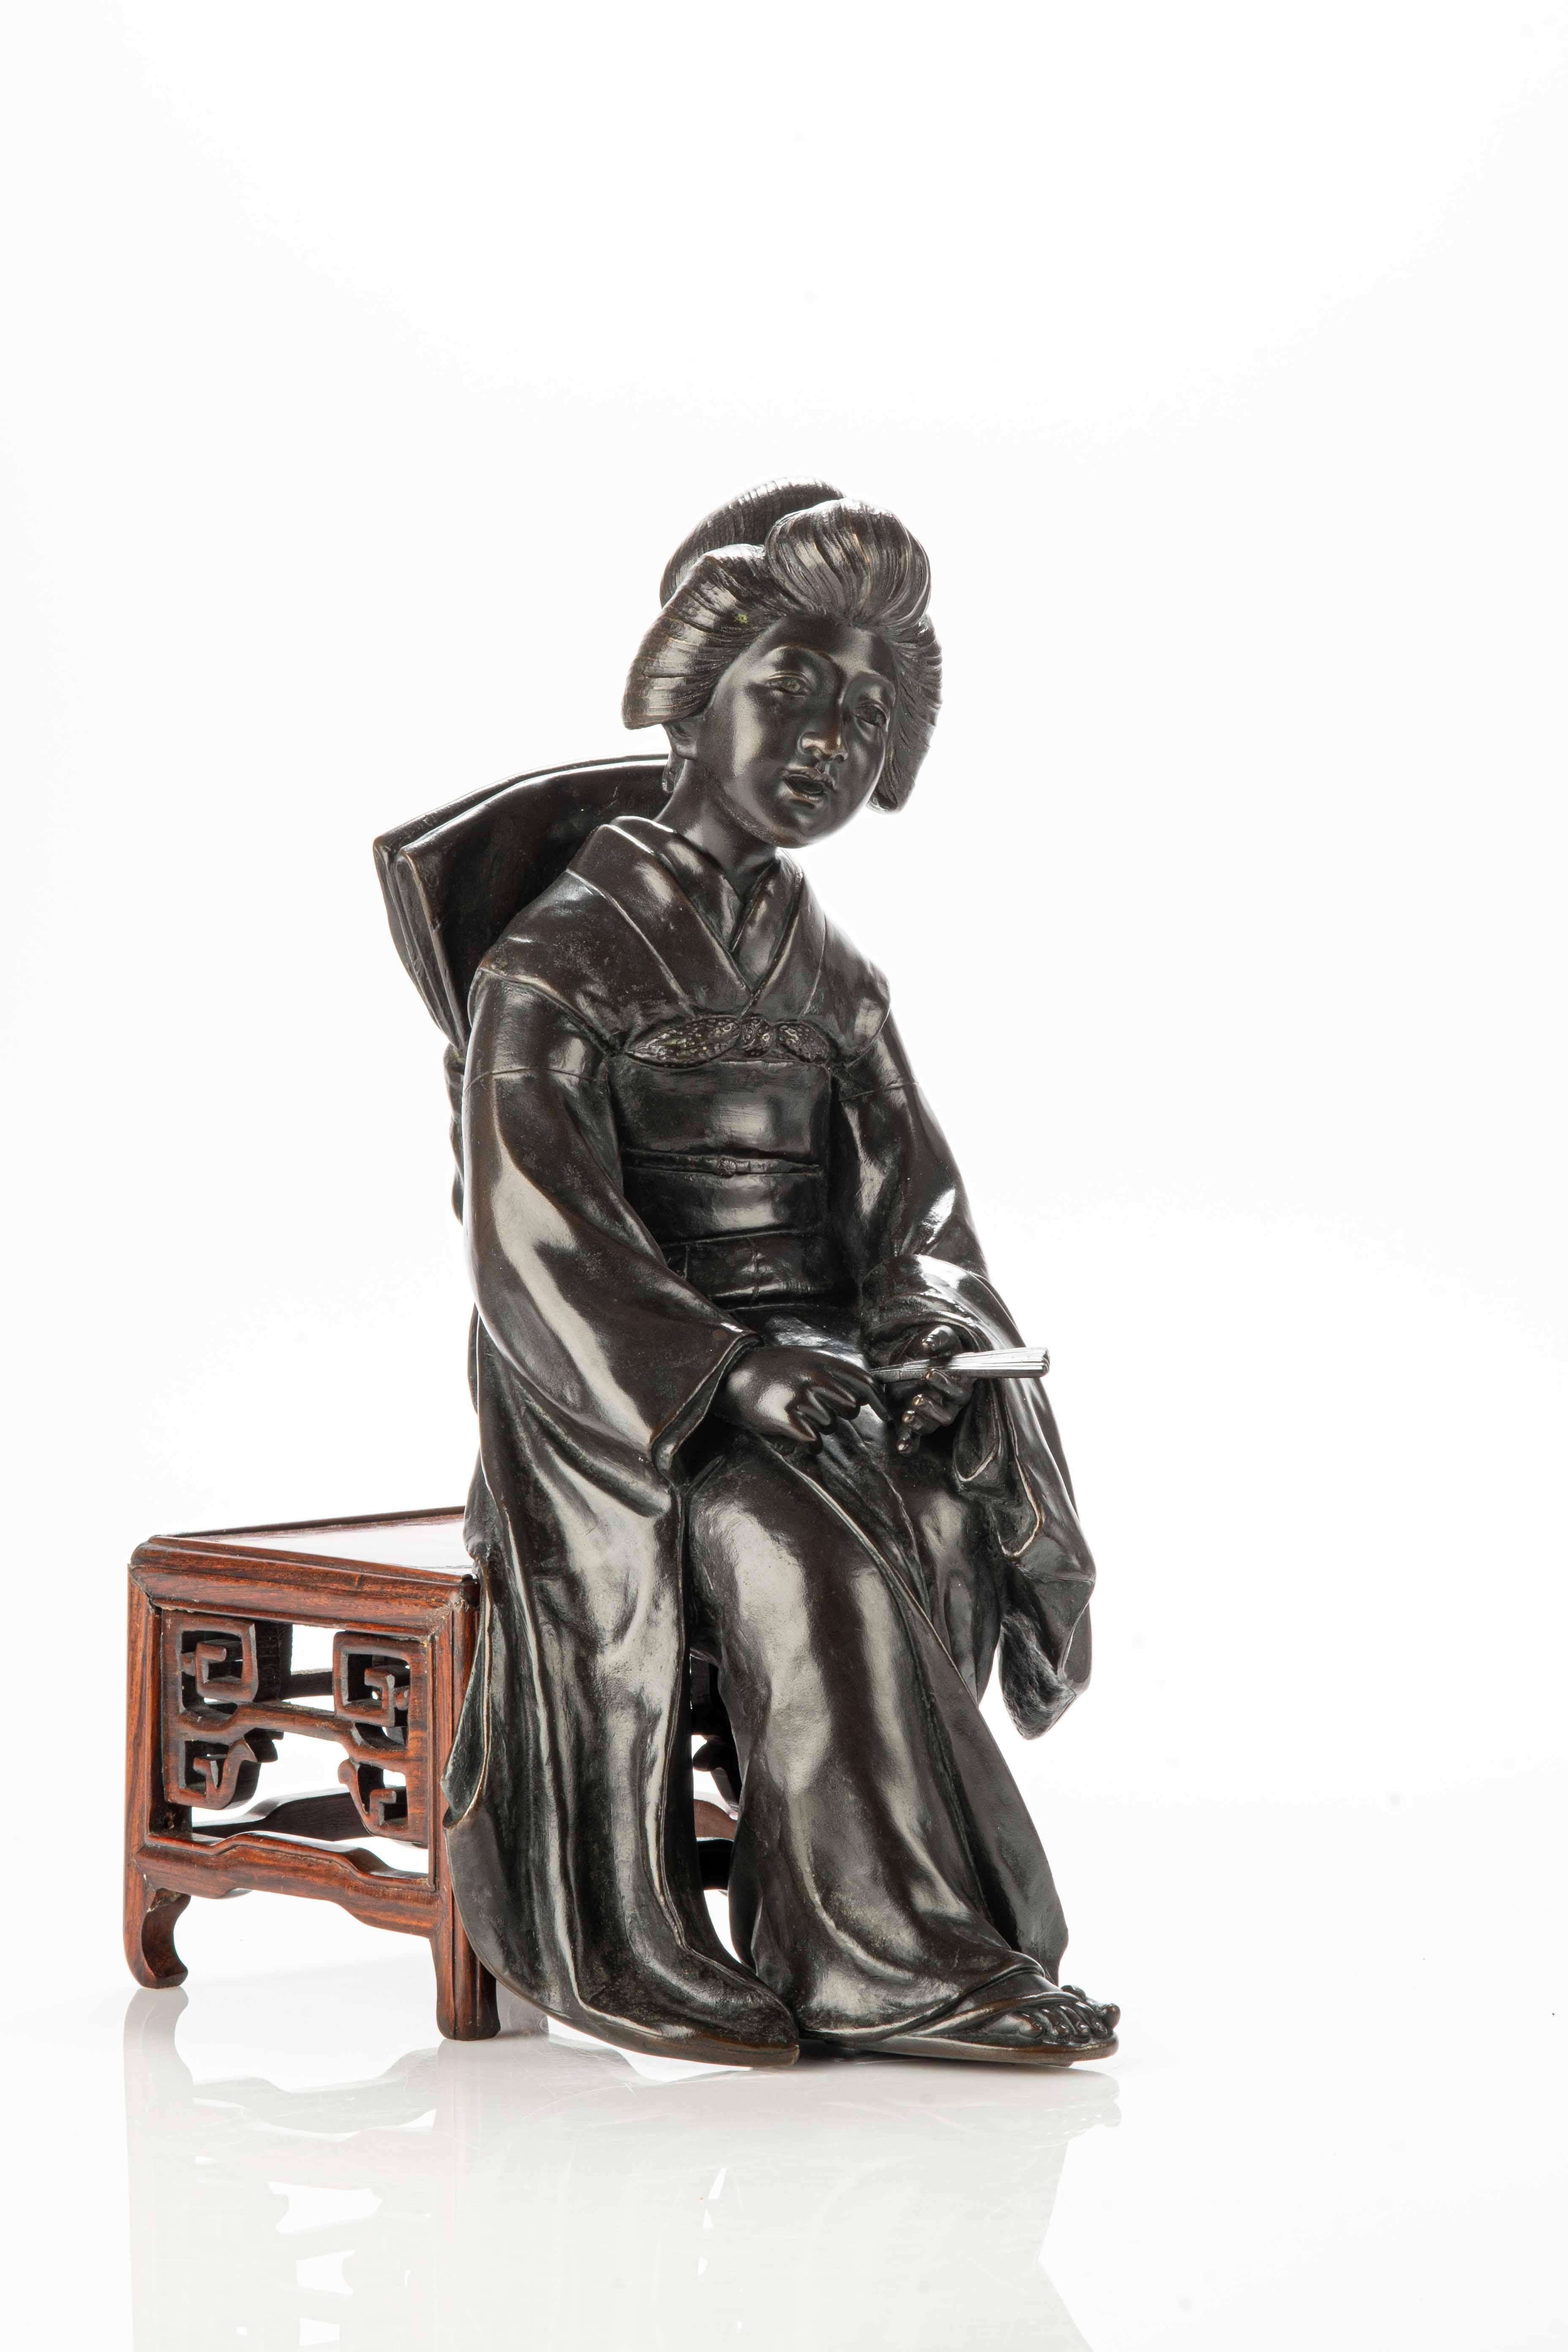 Tokyo school bronze sculpture depicting a geisha sitting on a wooden bench. The figure of the geisha is portrayed in a moment of deep reflection, with a fan held in her hands. She wears a luxurious festive kimono, embellished with rich details and a